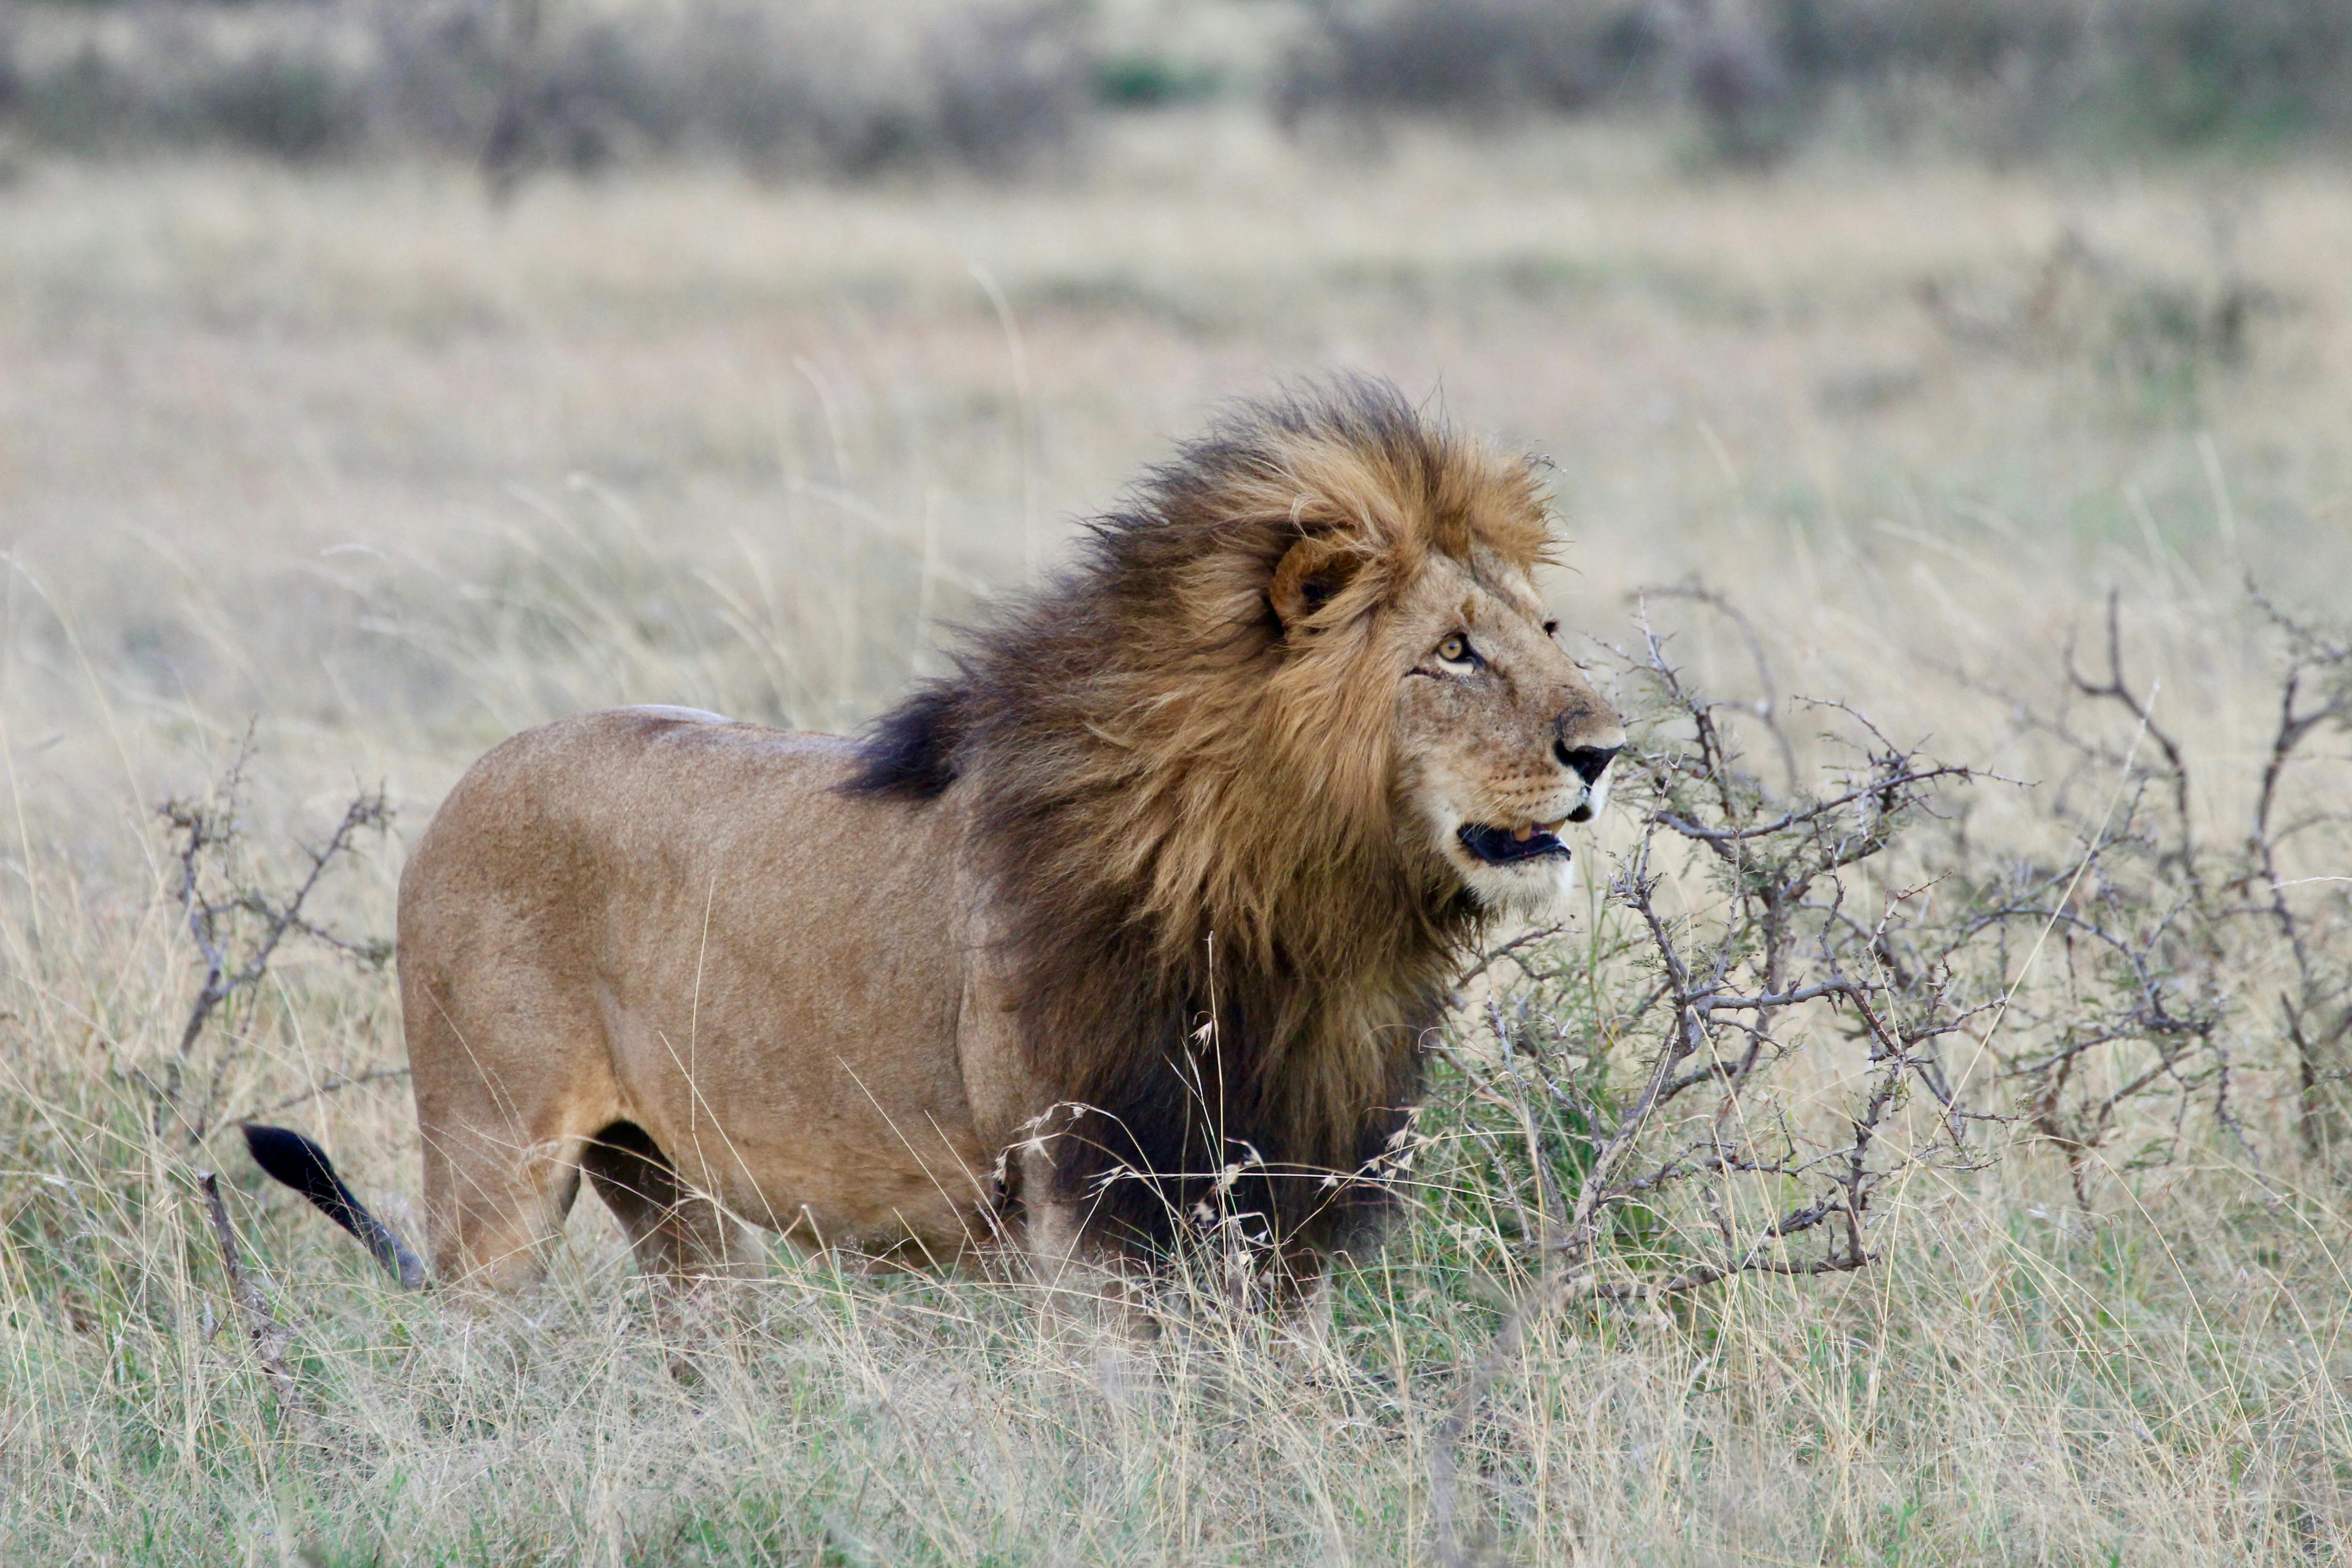 Counting Kenya's lions through a country-wide survey